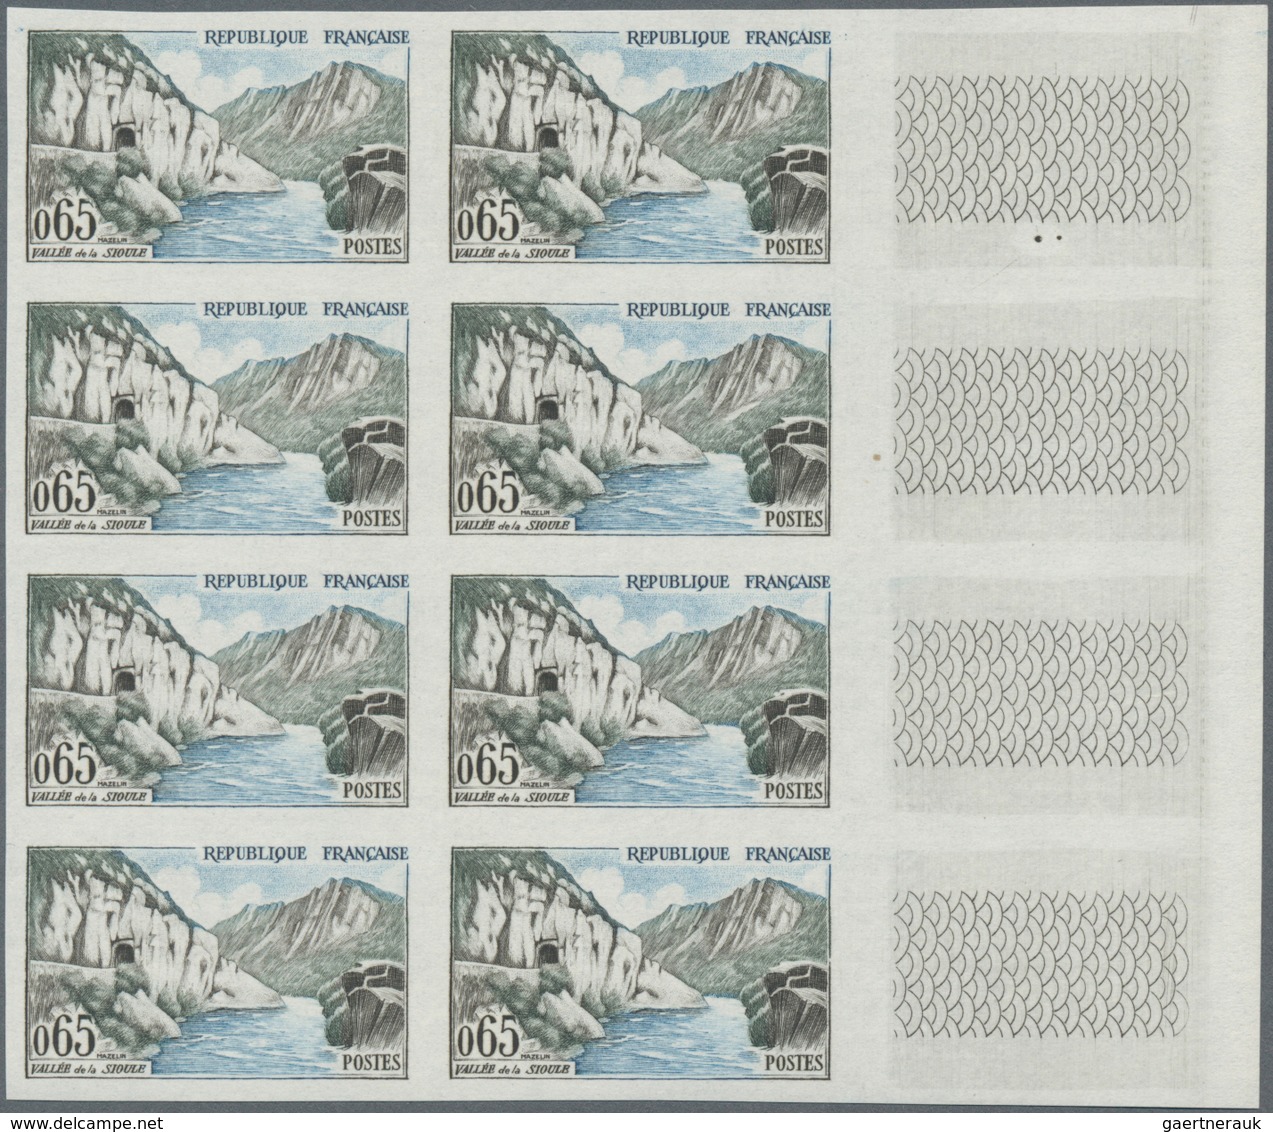 Frankreich: 1960, definitives 'buildings and landscapes' complete set of seven in IMPERFORATED block